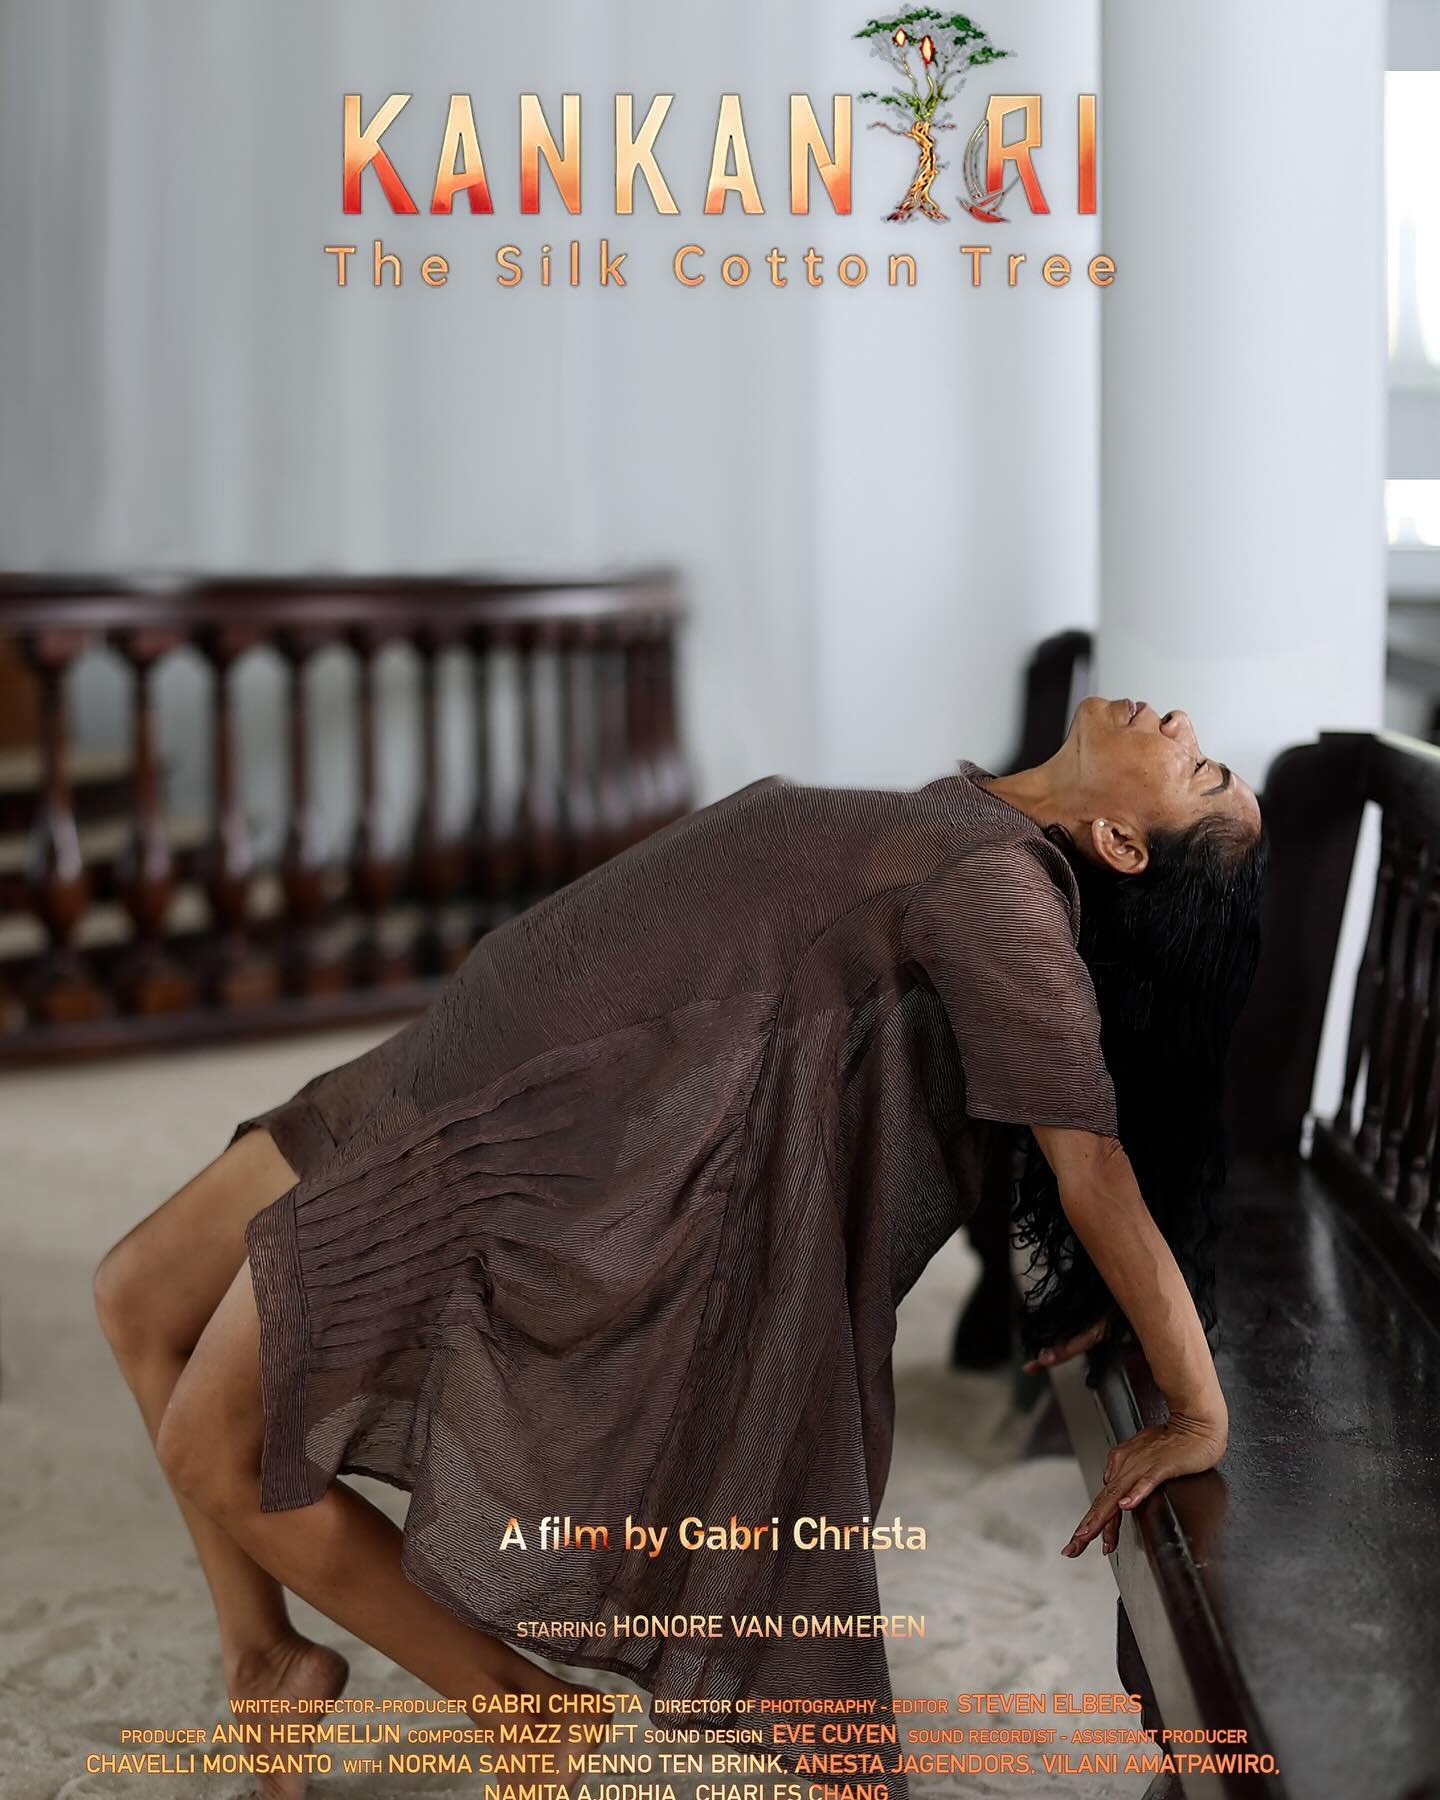 KANKANTRI opens @harlemfilmfest on May 16, we are so proud of this Suriname/ NYC film and grateful. 
@guy.de.lancey tried out different posters. I have my favorite but will post one every day.  You can vote for it! 
Hope to see you! Tickets are free!